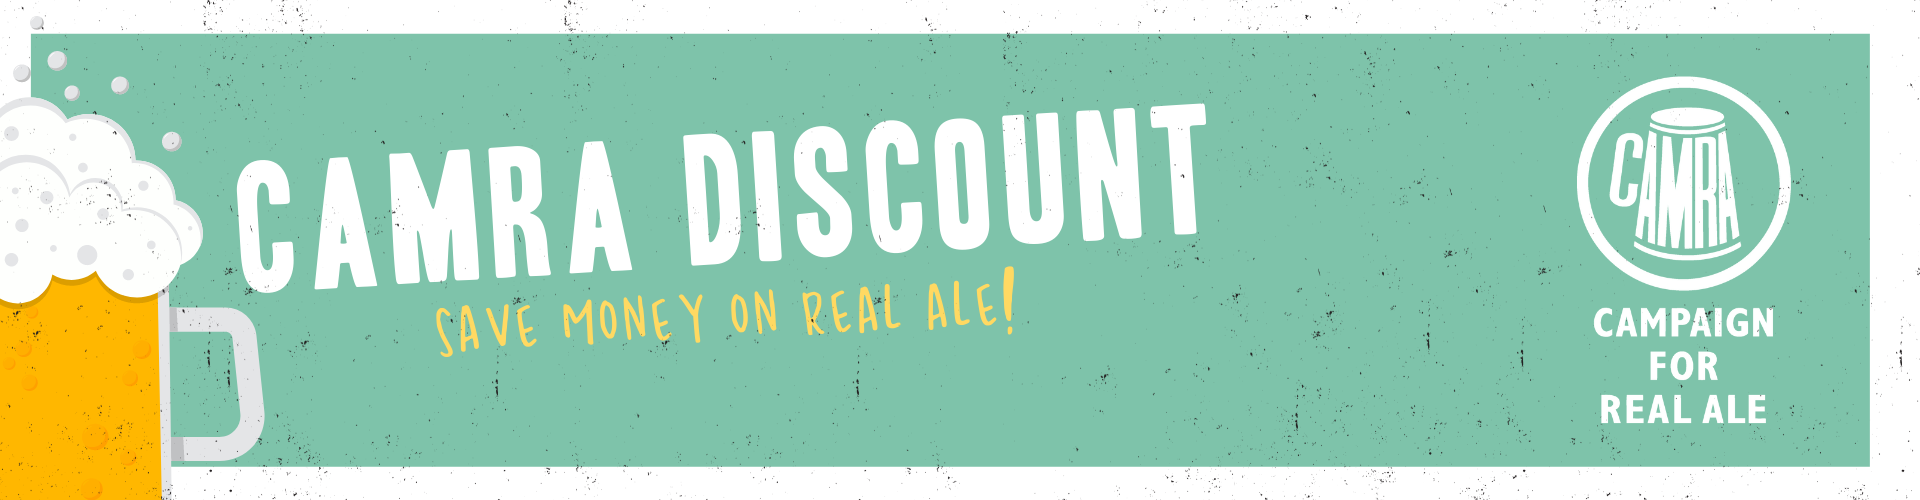 CAMRA Discount - Save Money on Real Ale. The Campaign for Real Ale